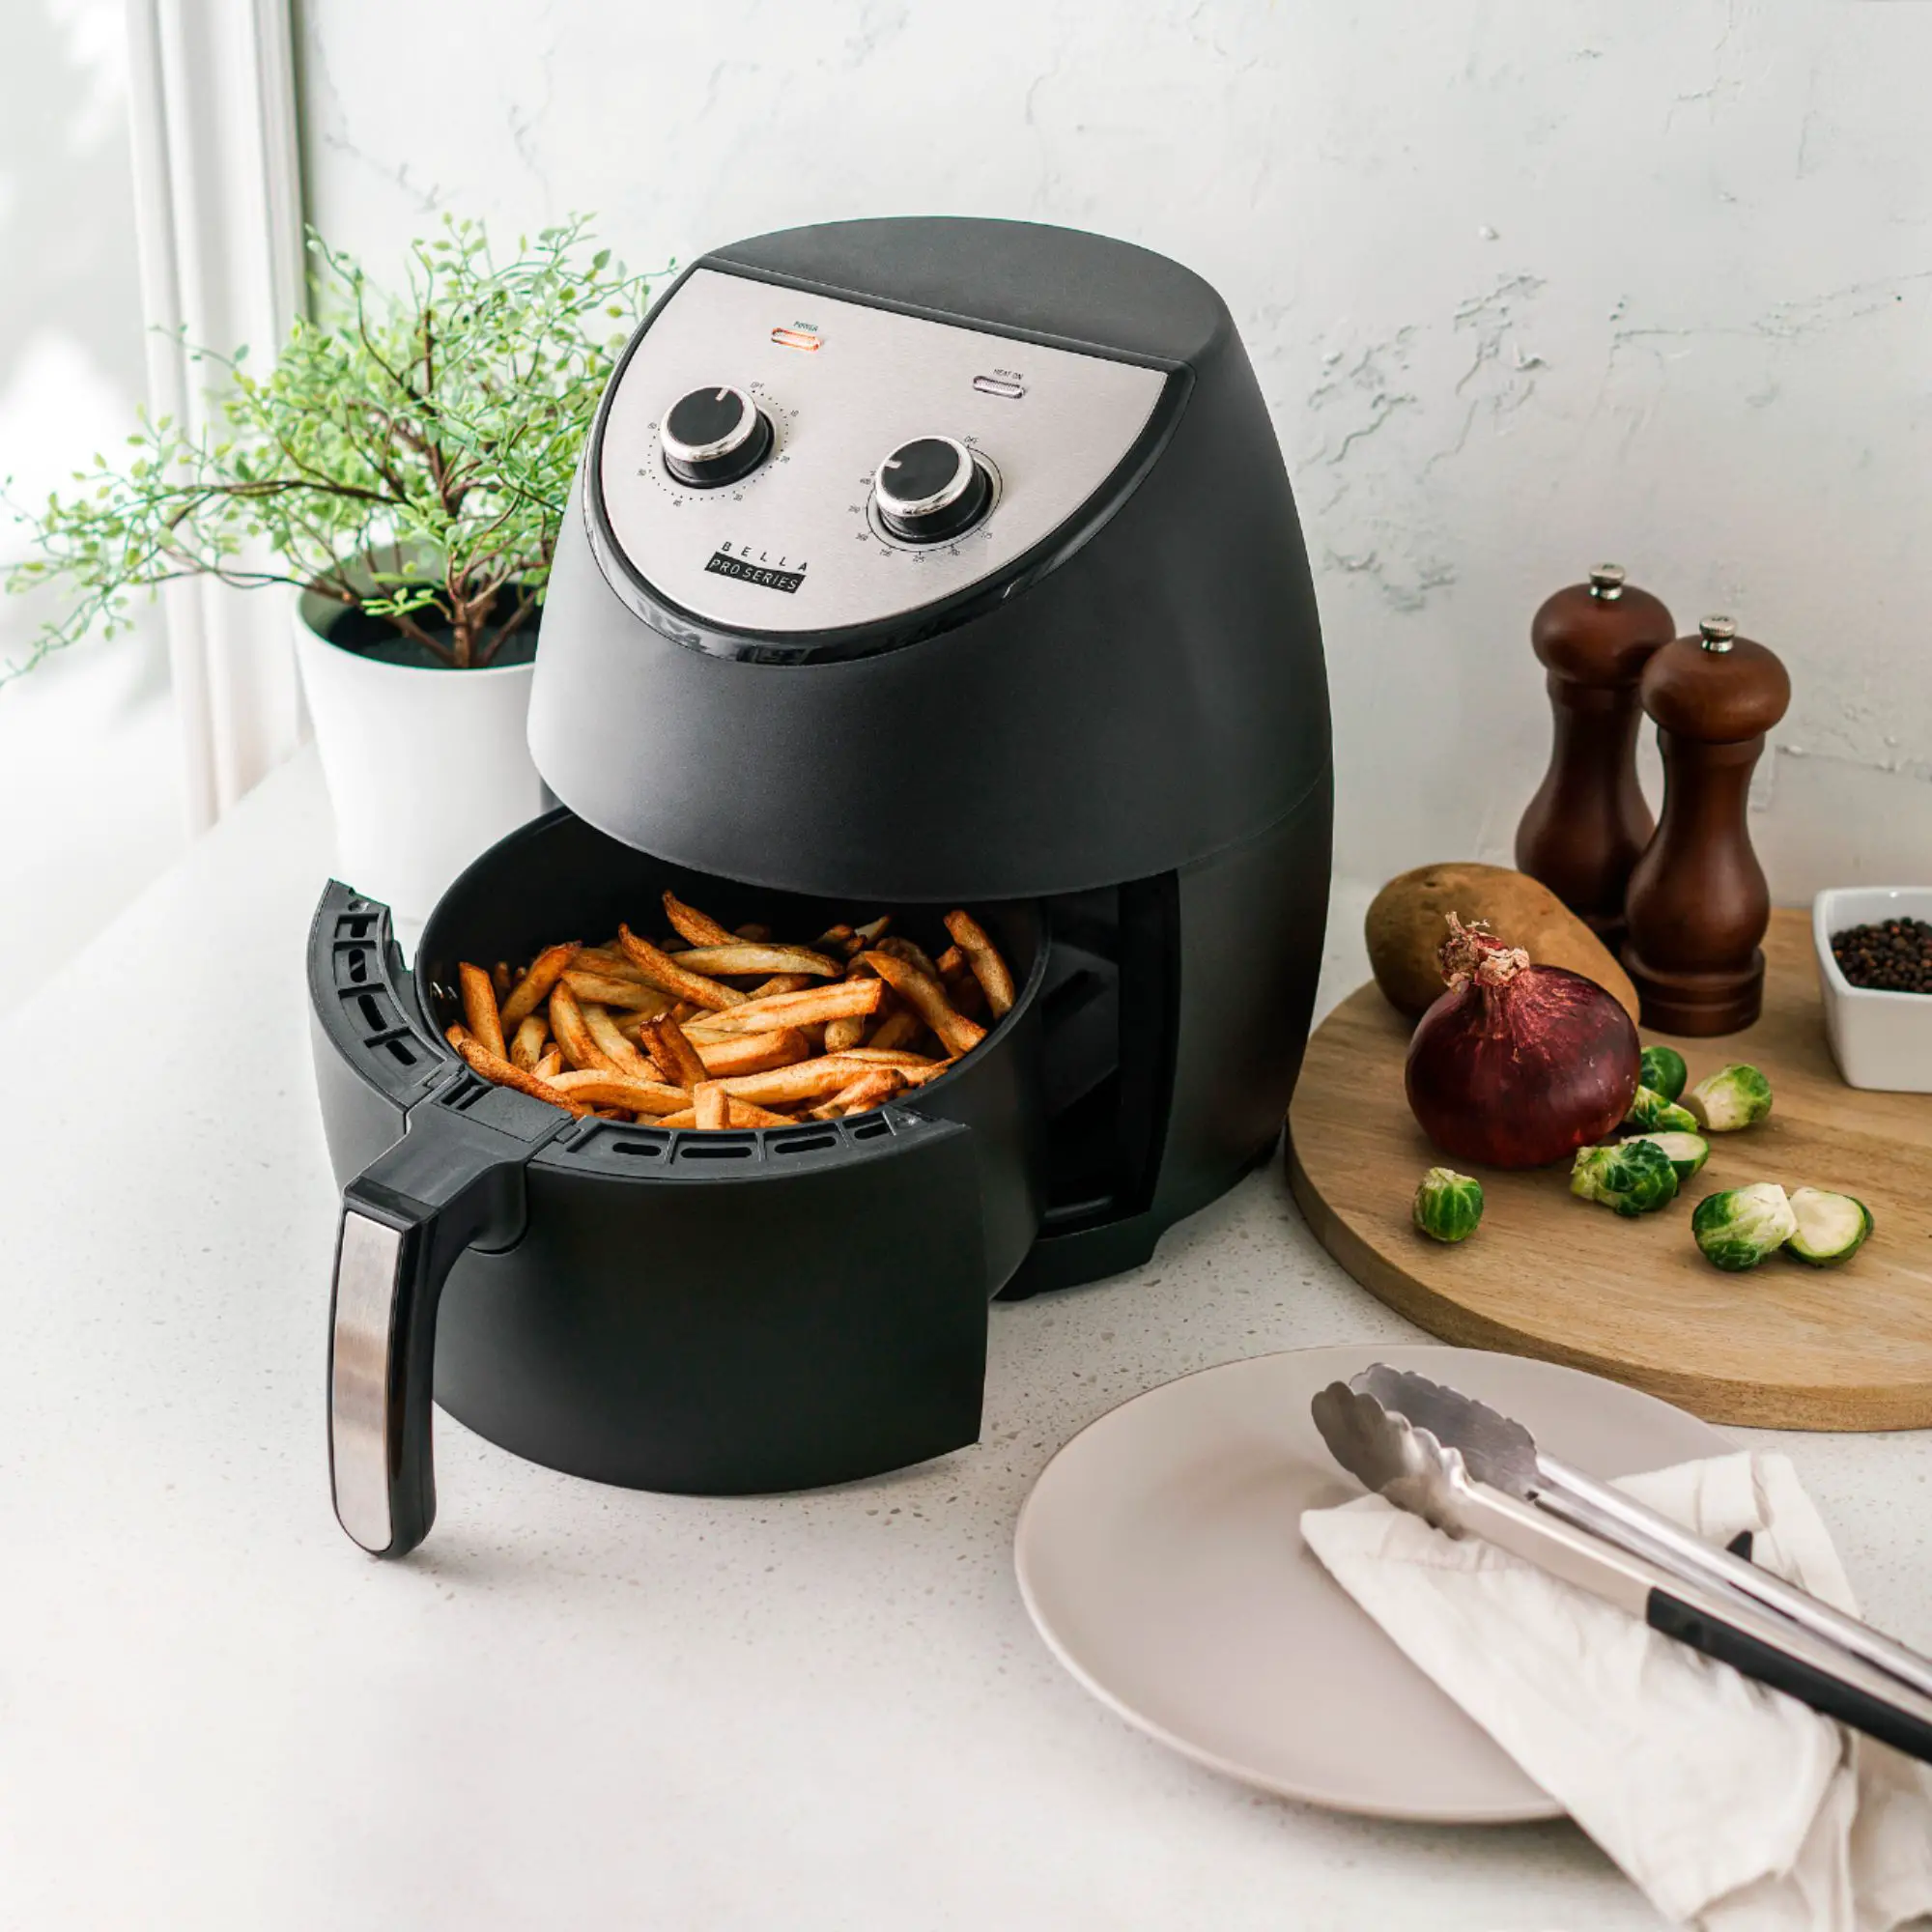 Is Getting An Air Fryer Worth It?